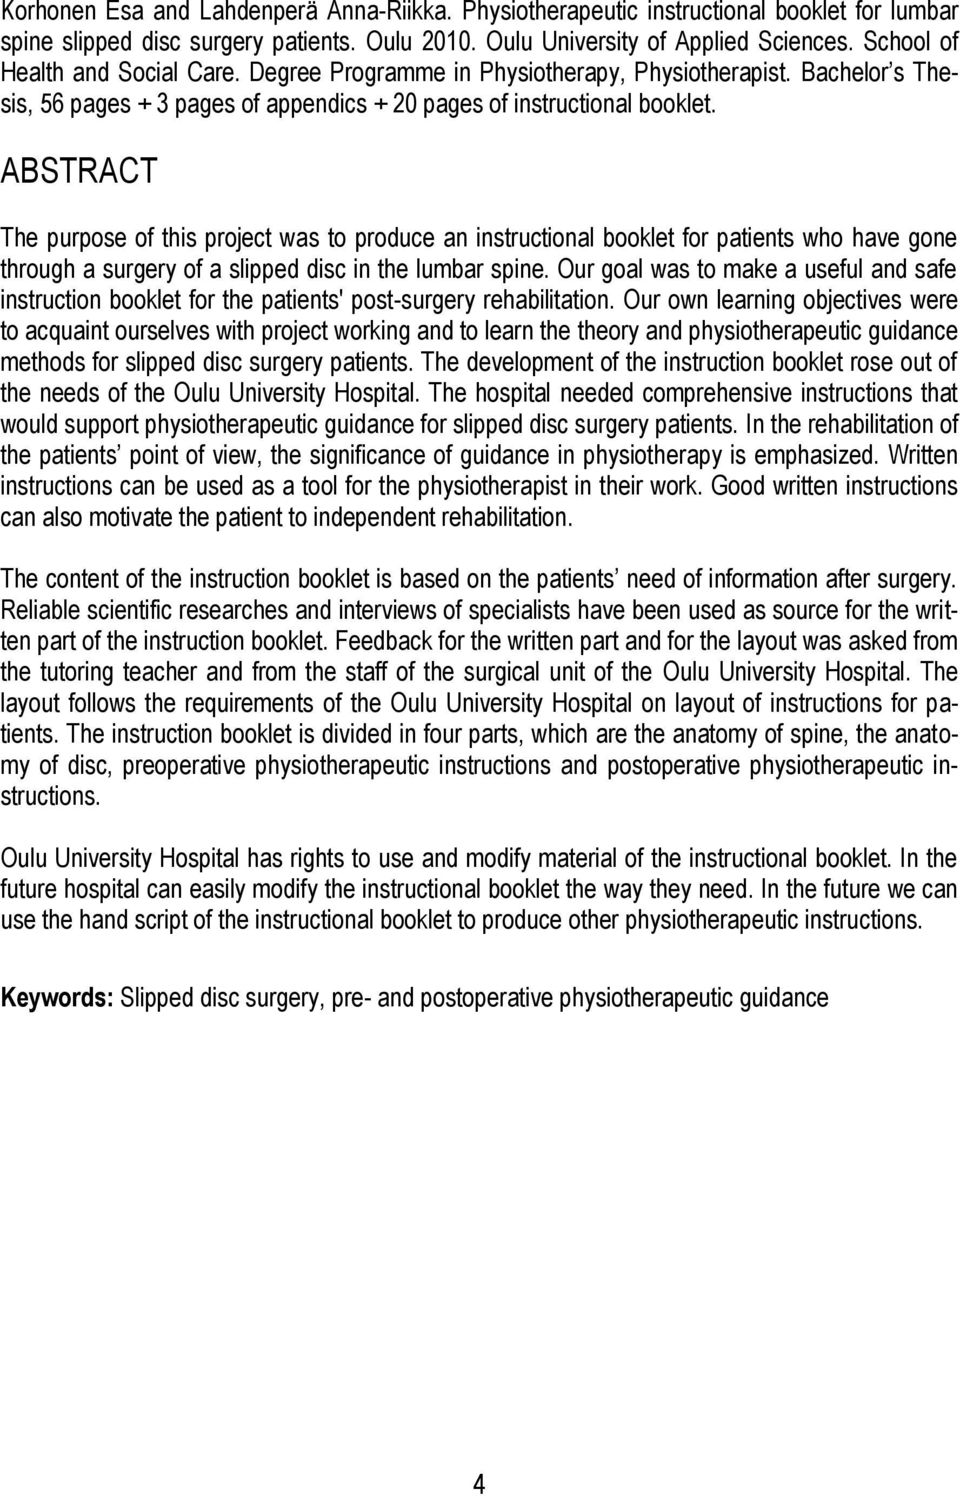 ABSTRACT The purpose of this project was to produce an instructional booklet for patients who have gone through a surgery of a slipped disc in the lumbar spine.